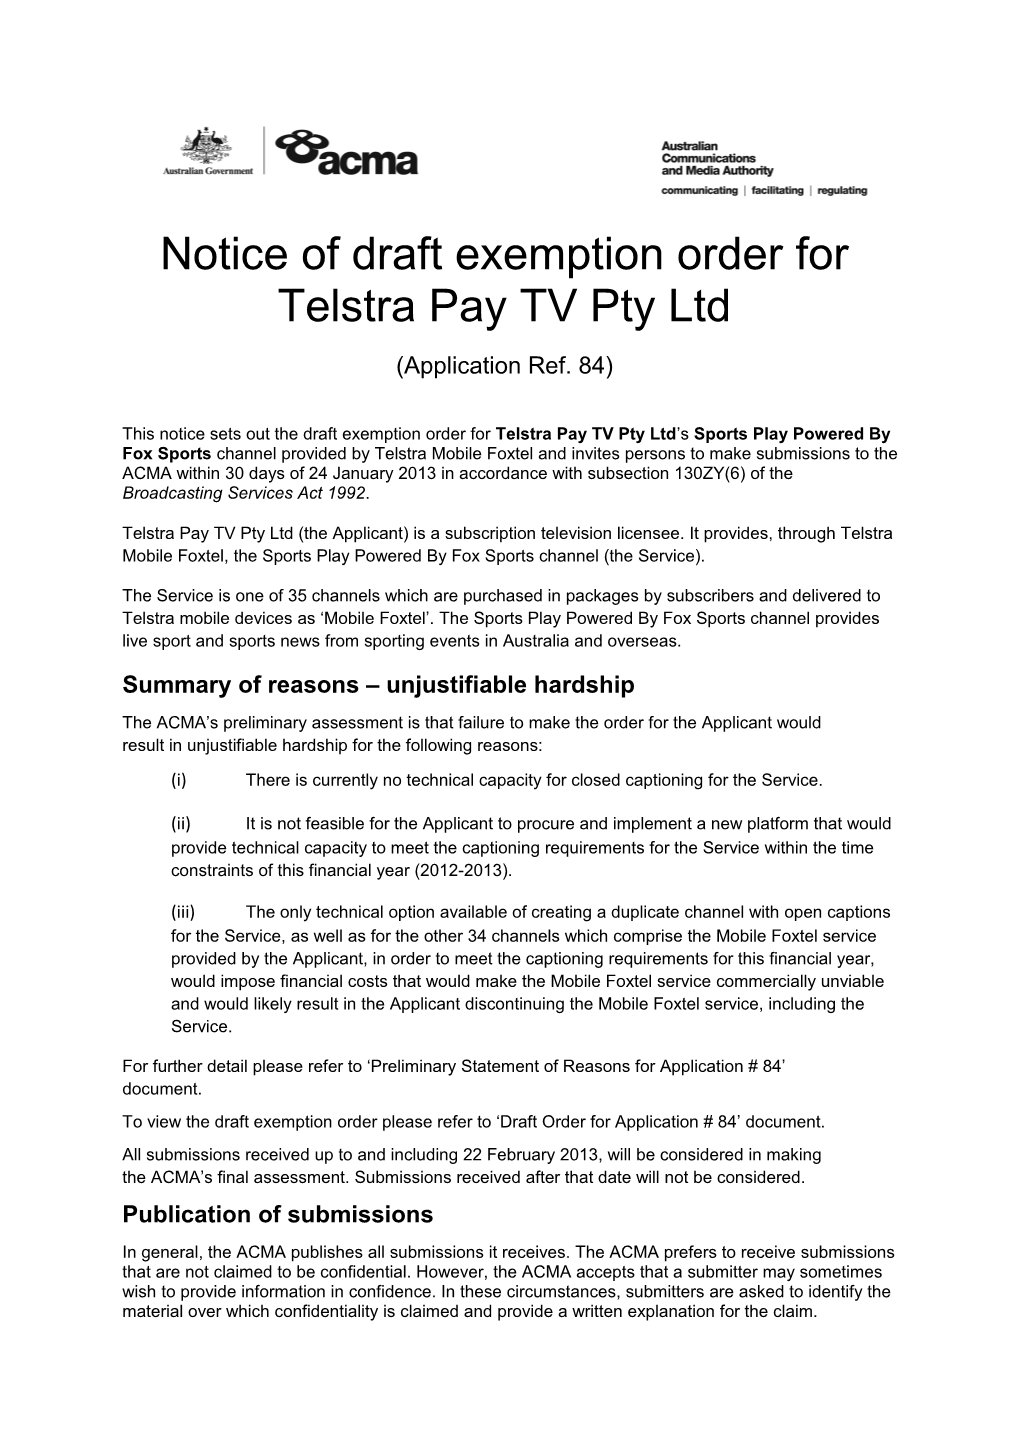 Notice of Draft Exemption Order for Telstra Pay TV Pty Ltd Cons #84